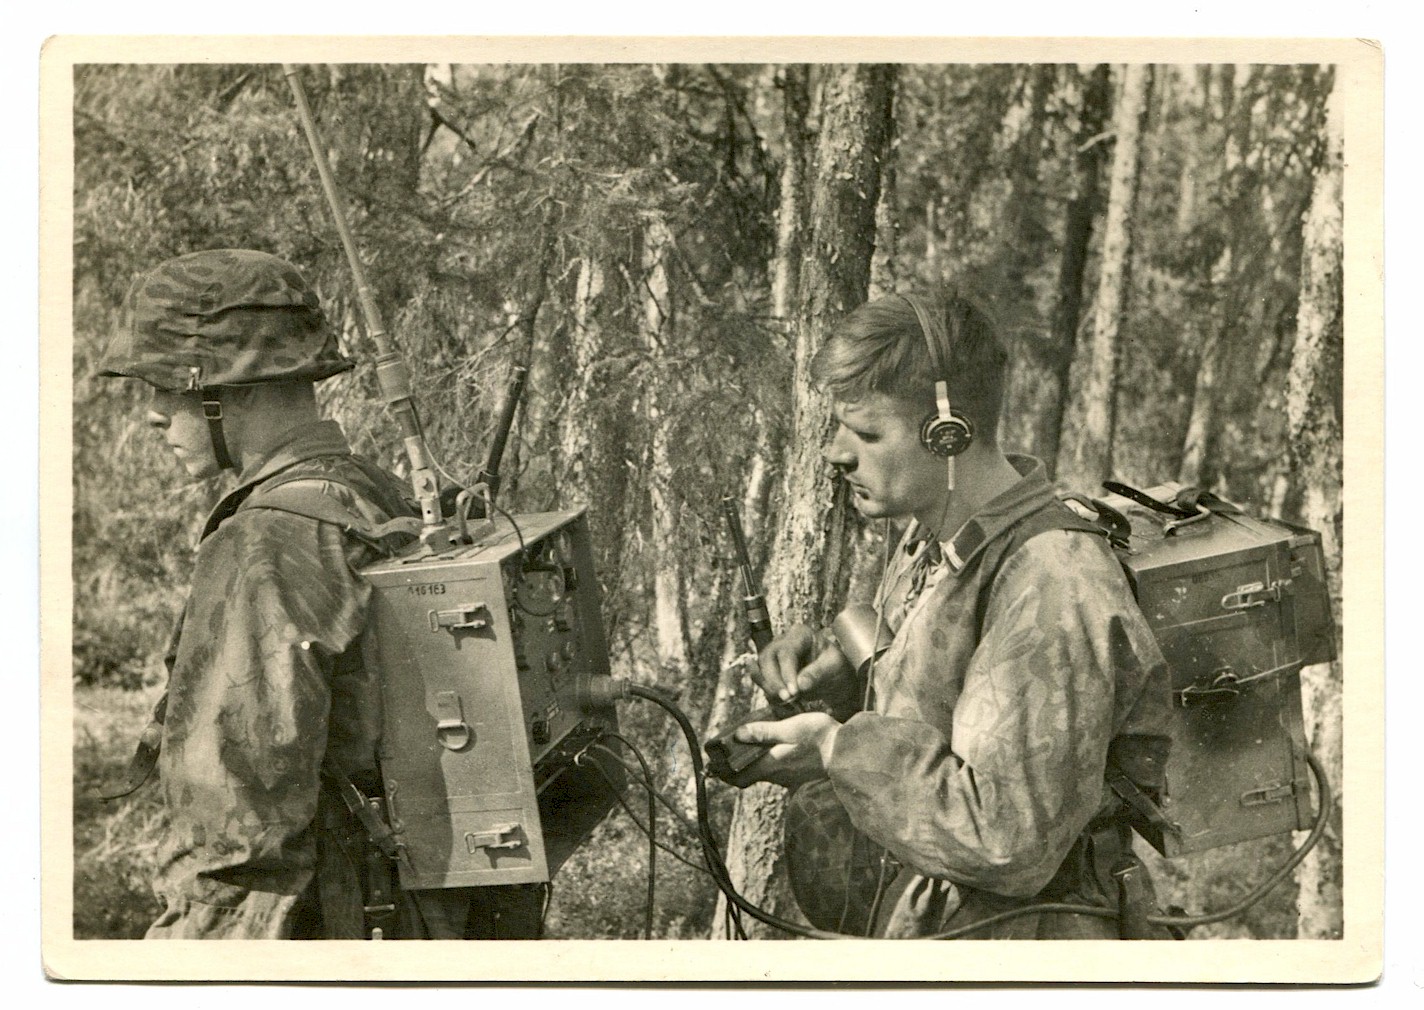 BATTLE OF THE SS MOUNTAIN DIVISION "NORTH" IN KARELIA POST CARD"OUR RADIO MEN IN THE FOREST"